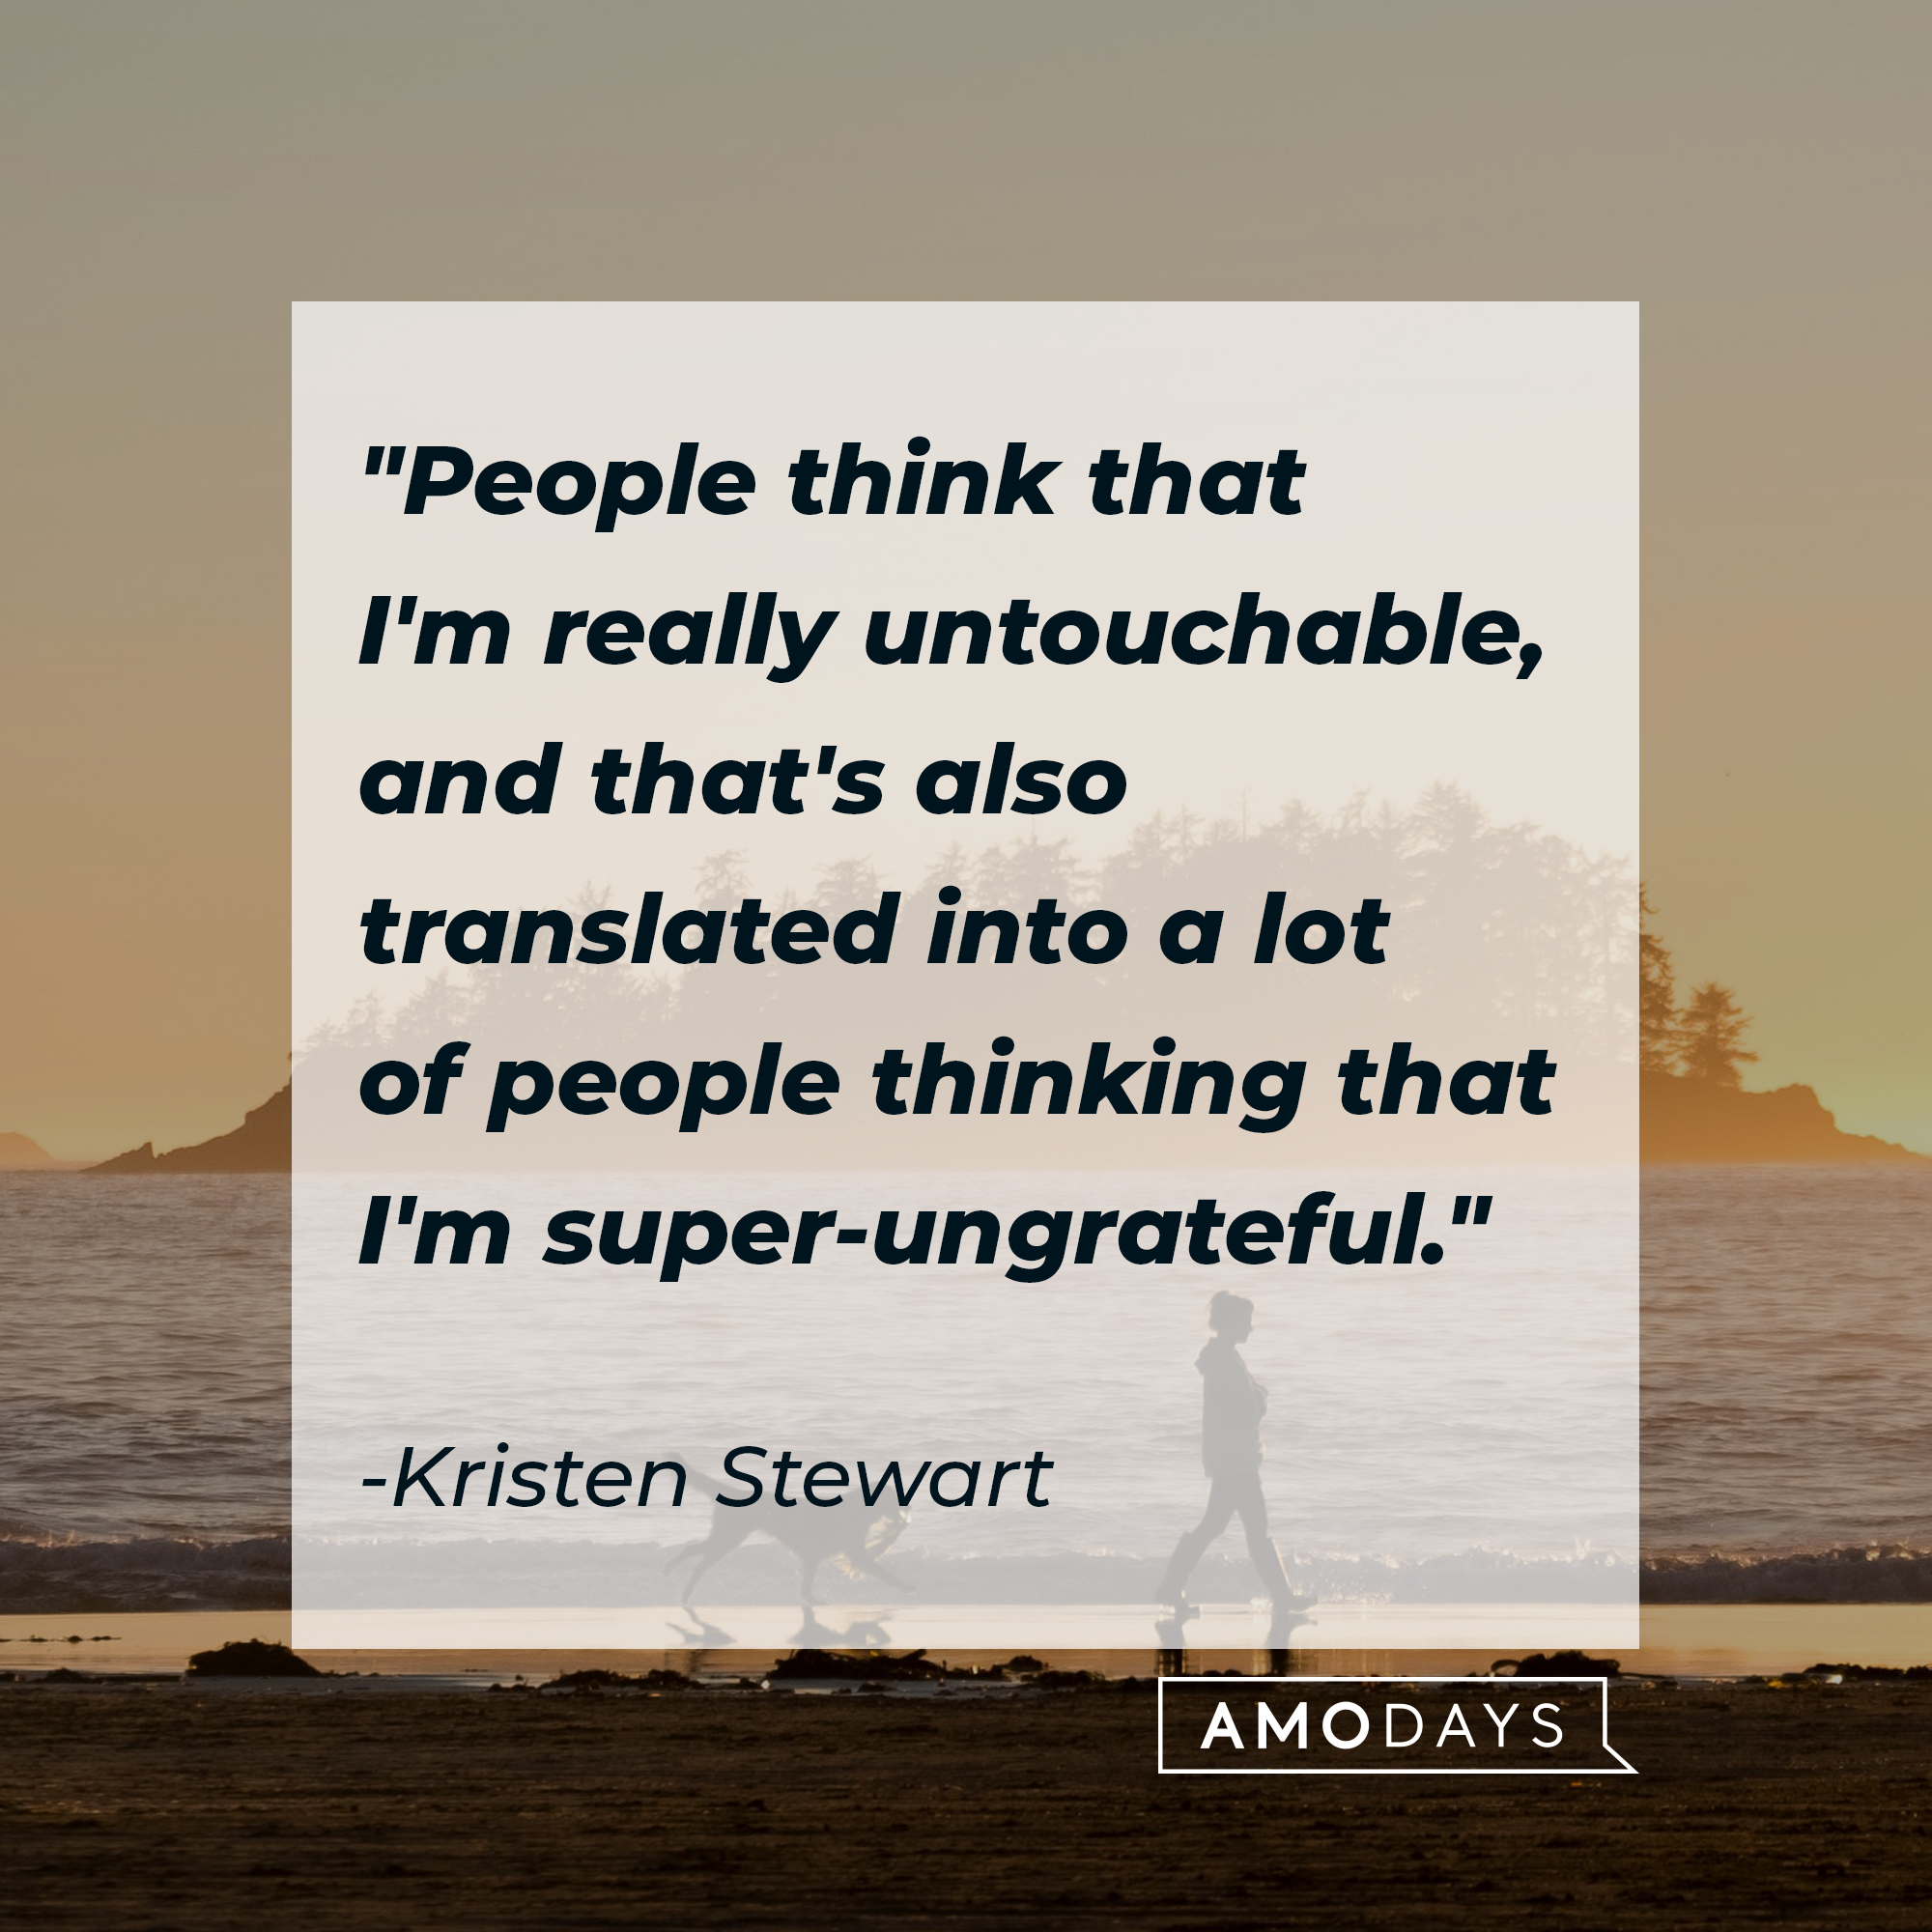 Kristen Stewart's quote: "People think that I'm really untouchable, and that's also translated into a lot of people thinking that I'm super-ungrateful." | Source: Unsplash